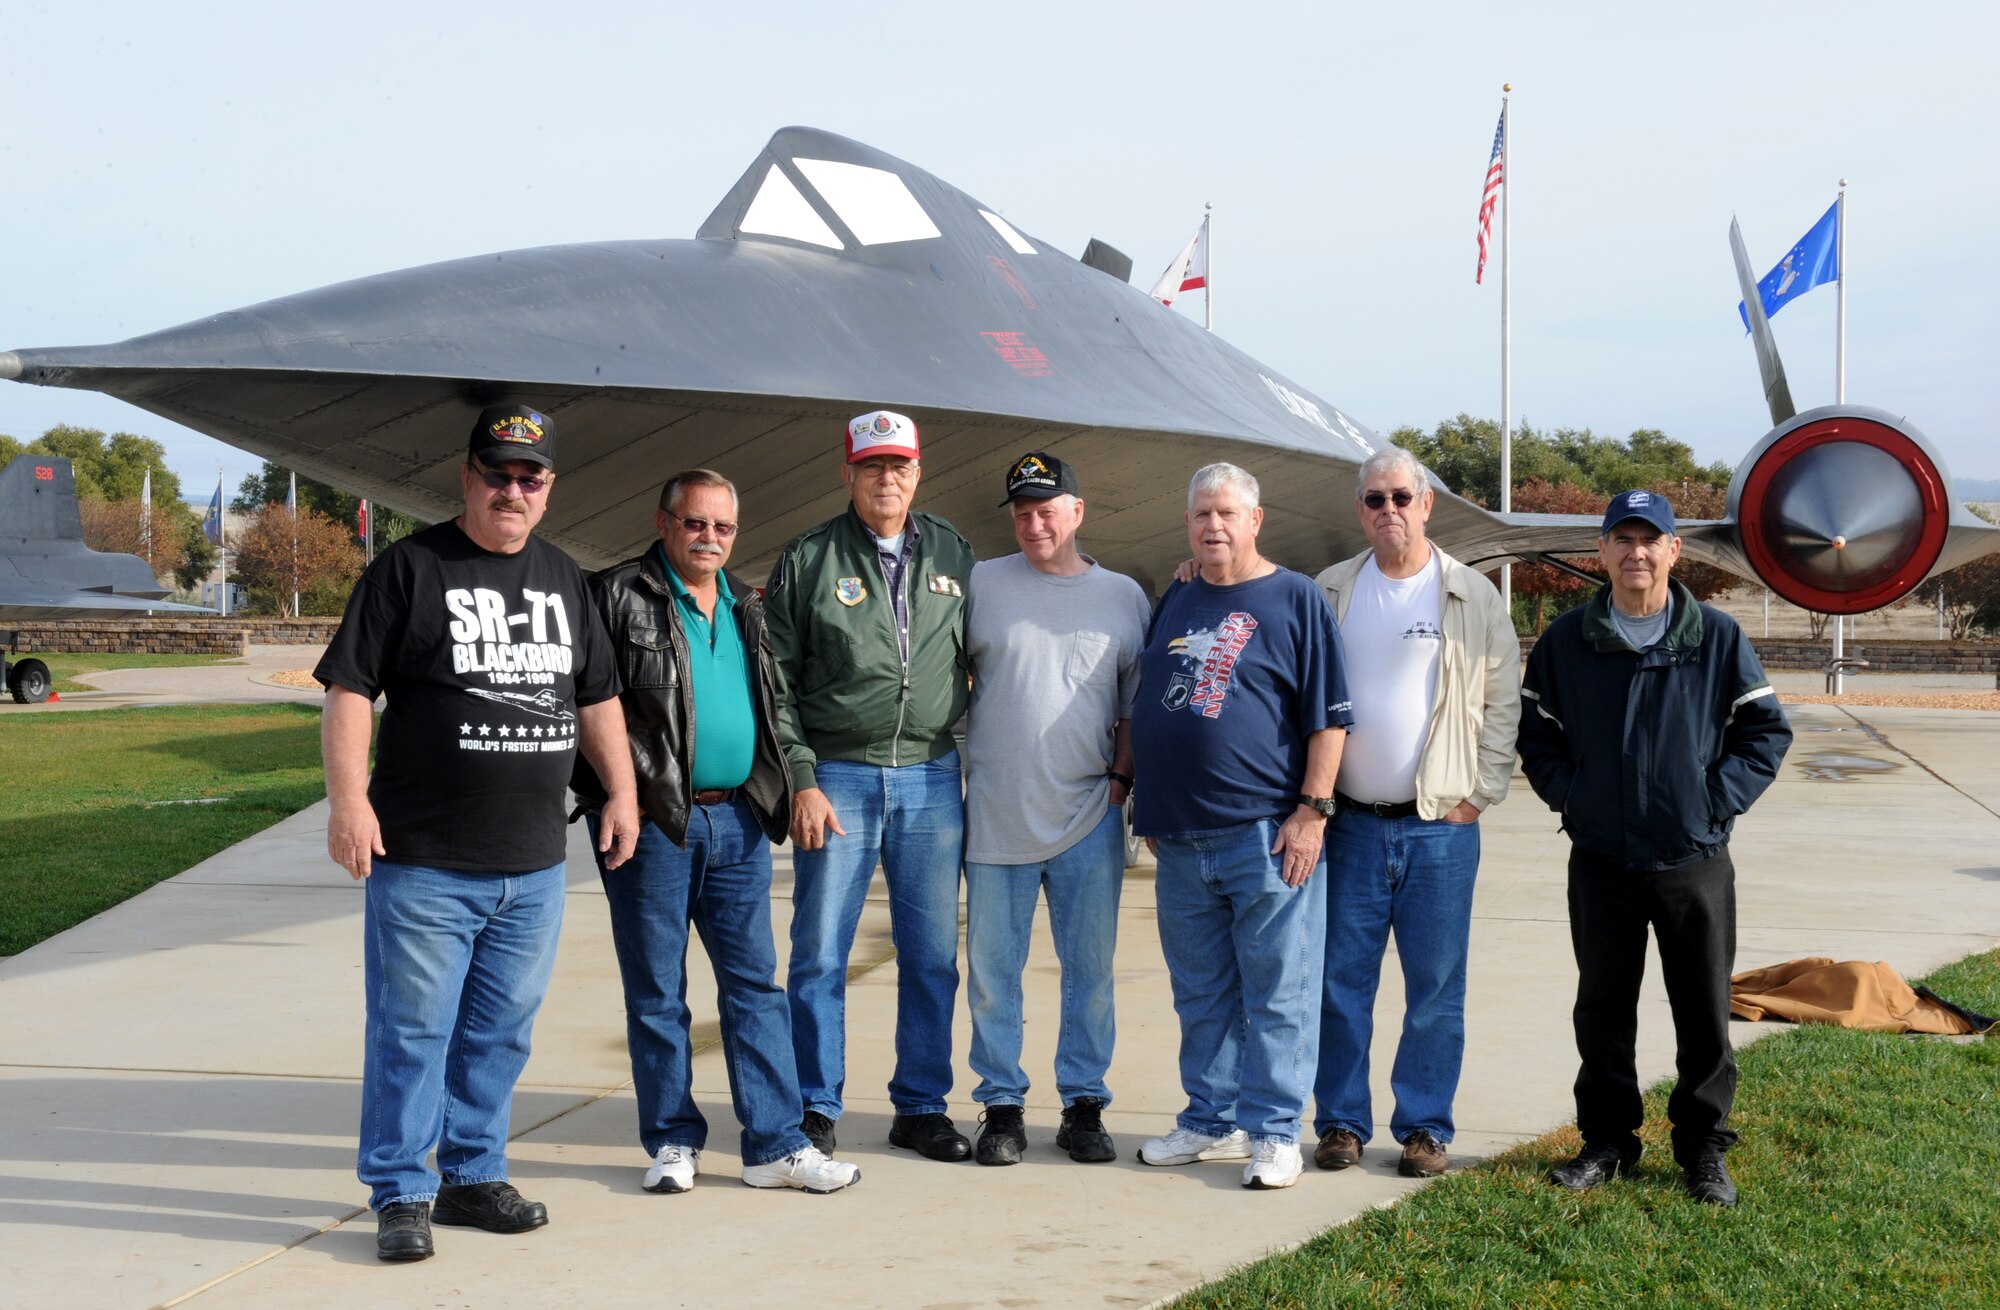 Members of the local Blackbird Maintainers group pose for a picture at Beale Air Force Base, California, Dec. 08, 2015. The group is comprised of former Blackbird maintainers and personnel that contributed to the SR-71 program. (U.S. Air Force photo by Staff Sgt. Robert M. Trujillo)